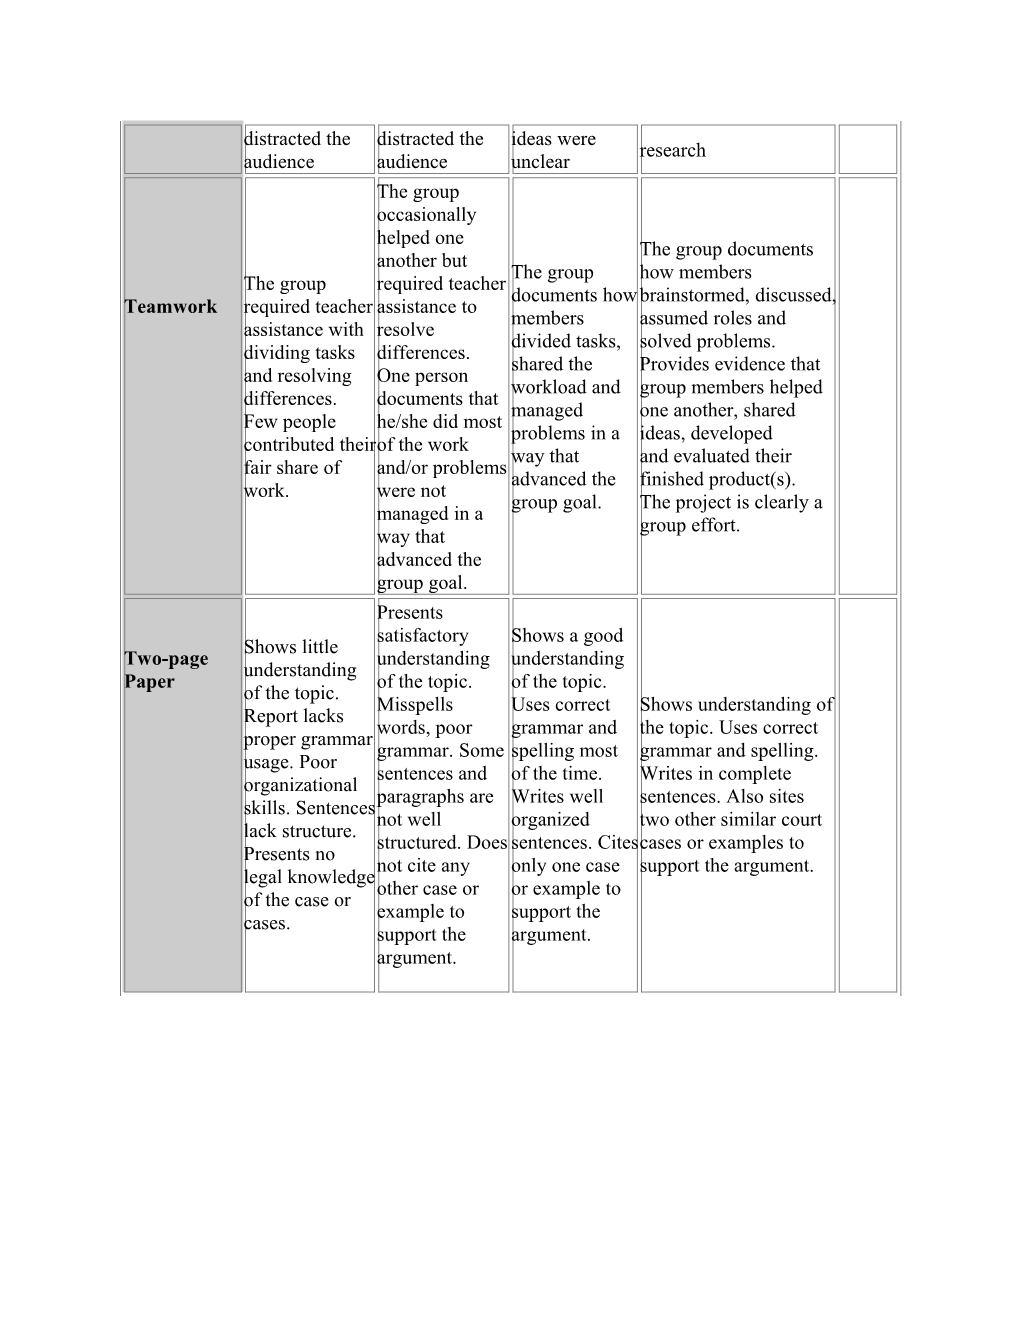 Rubric for Grading